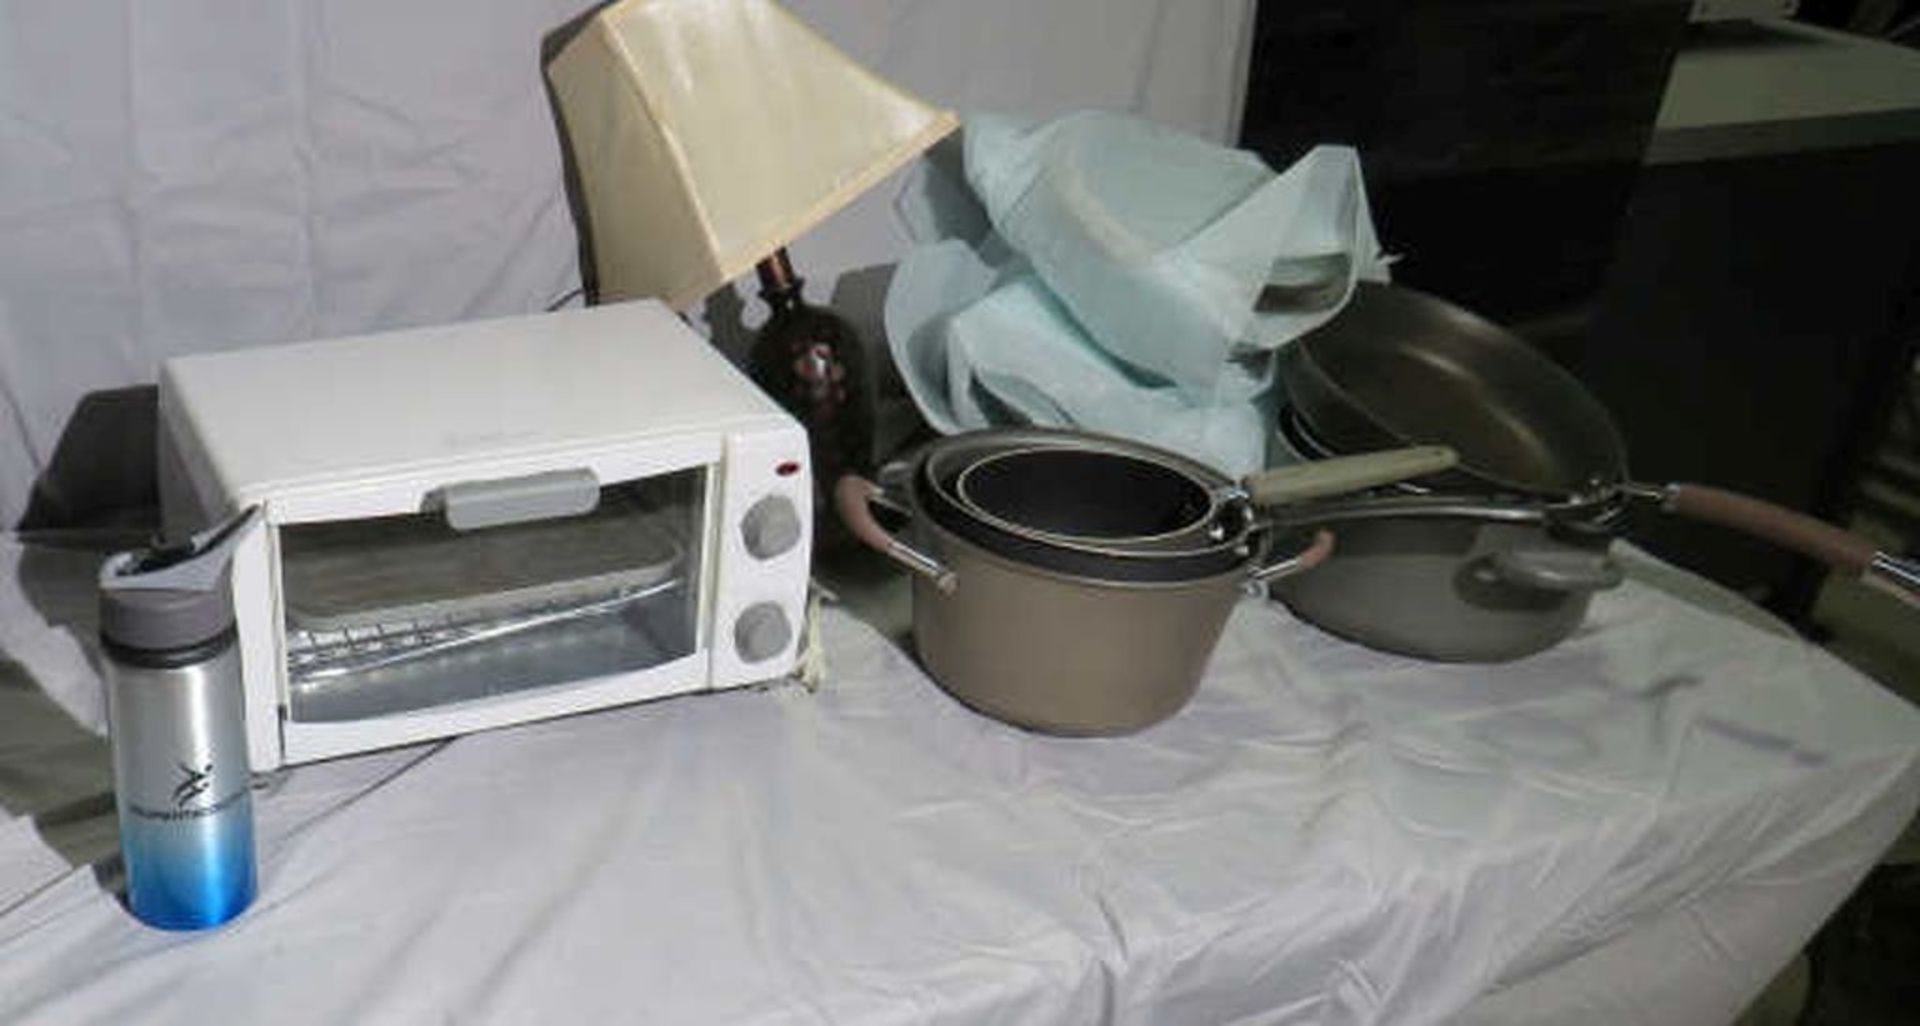 silver stone and total system cookware pots, pans, lids, oven